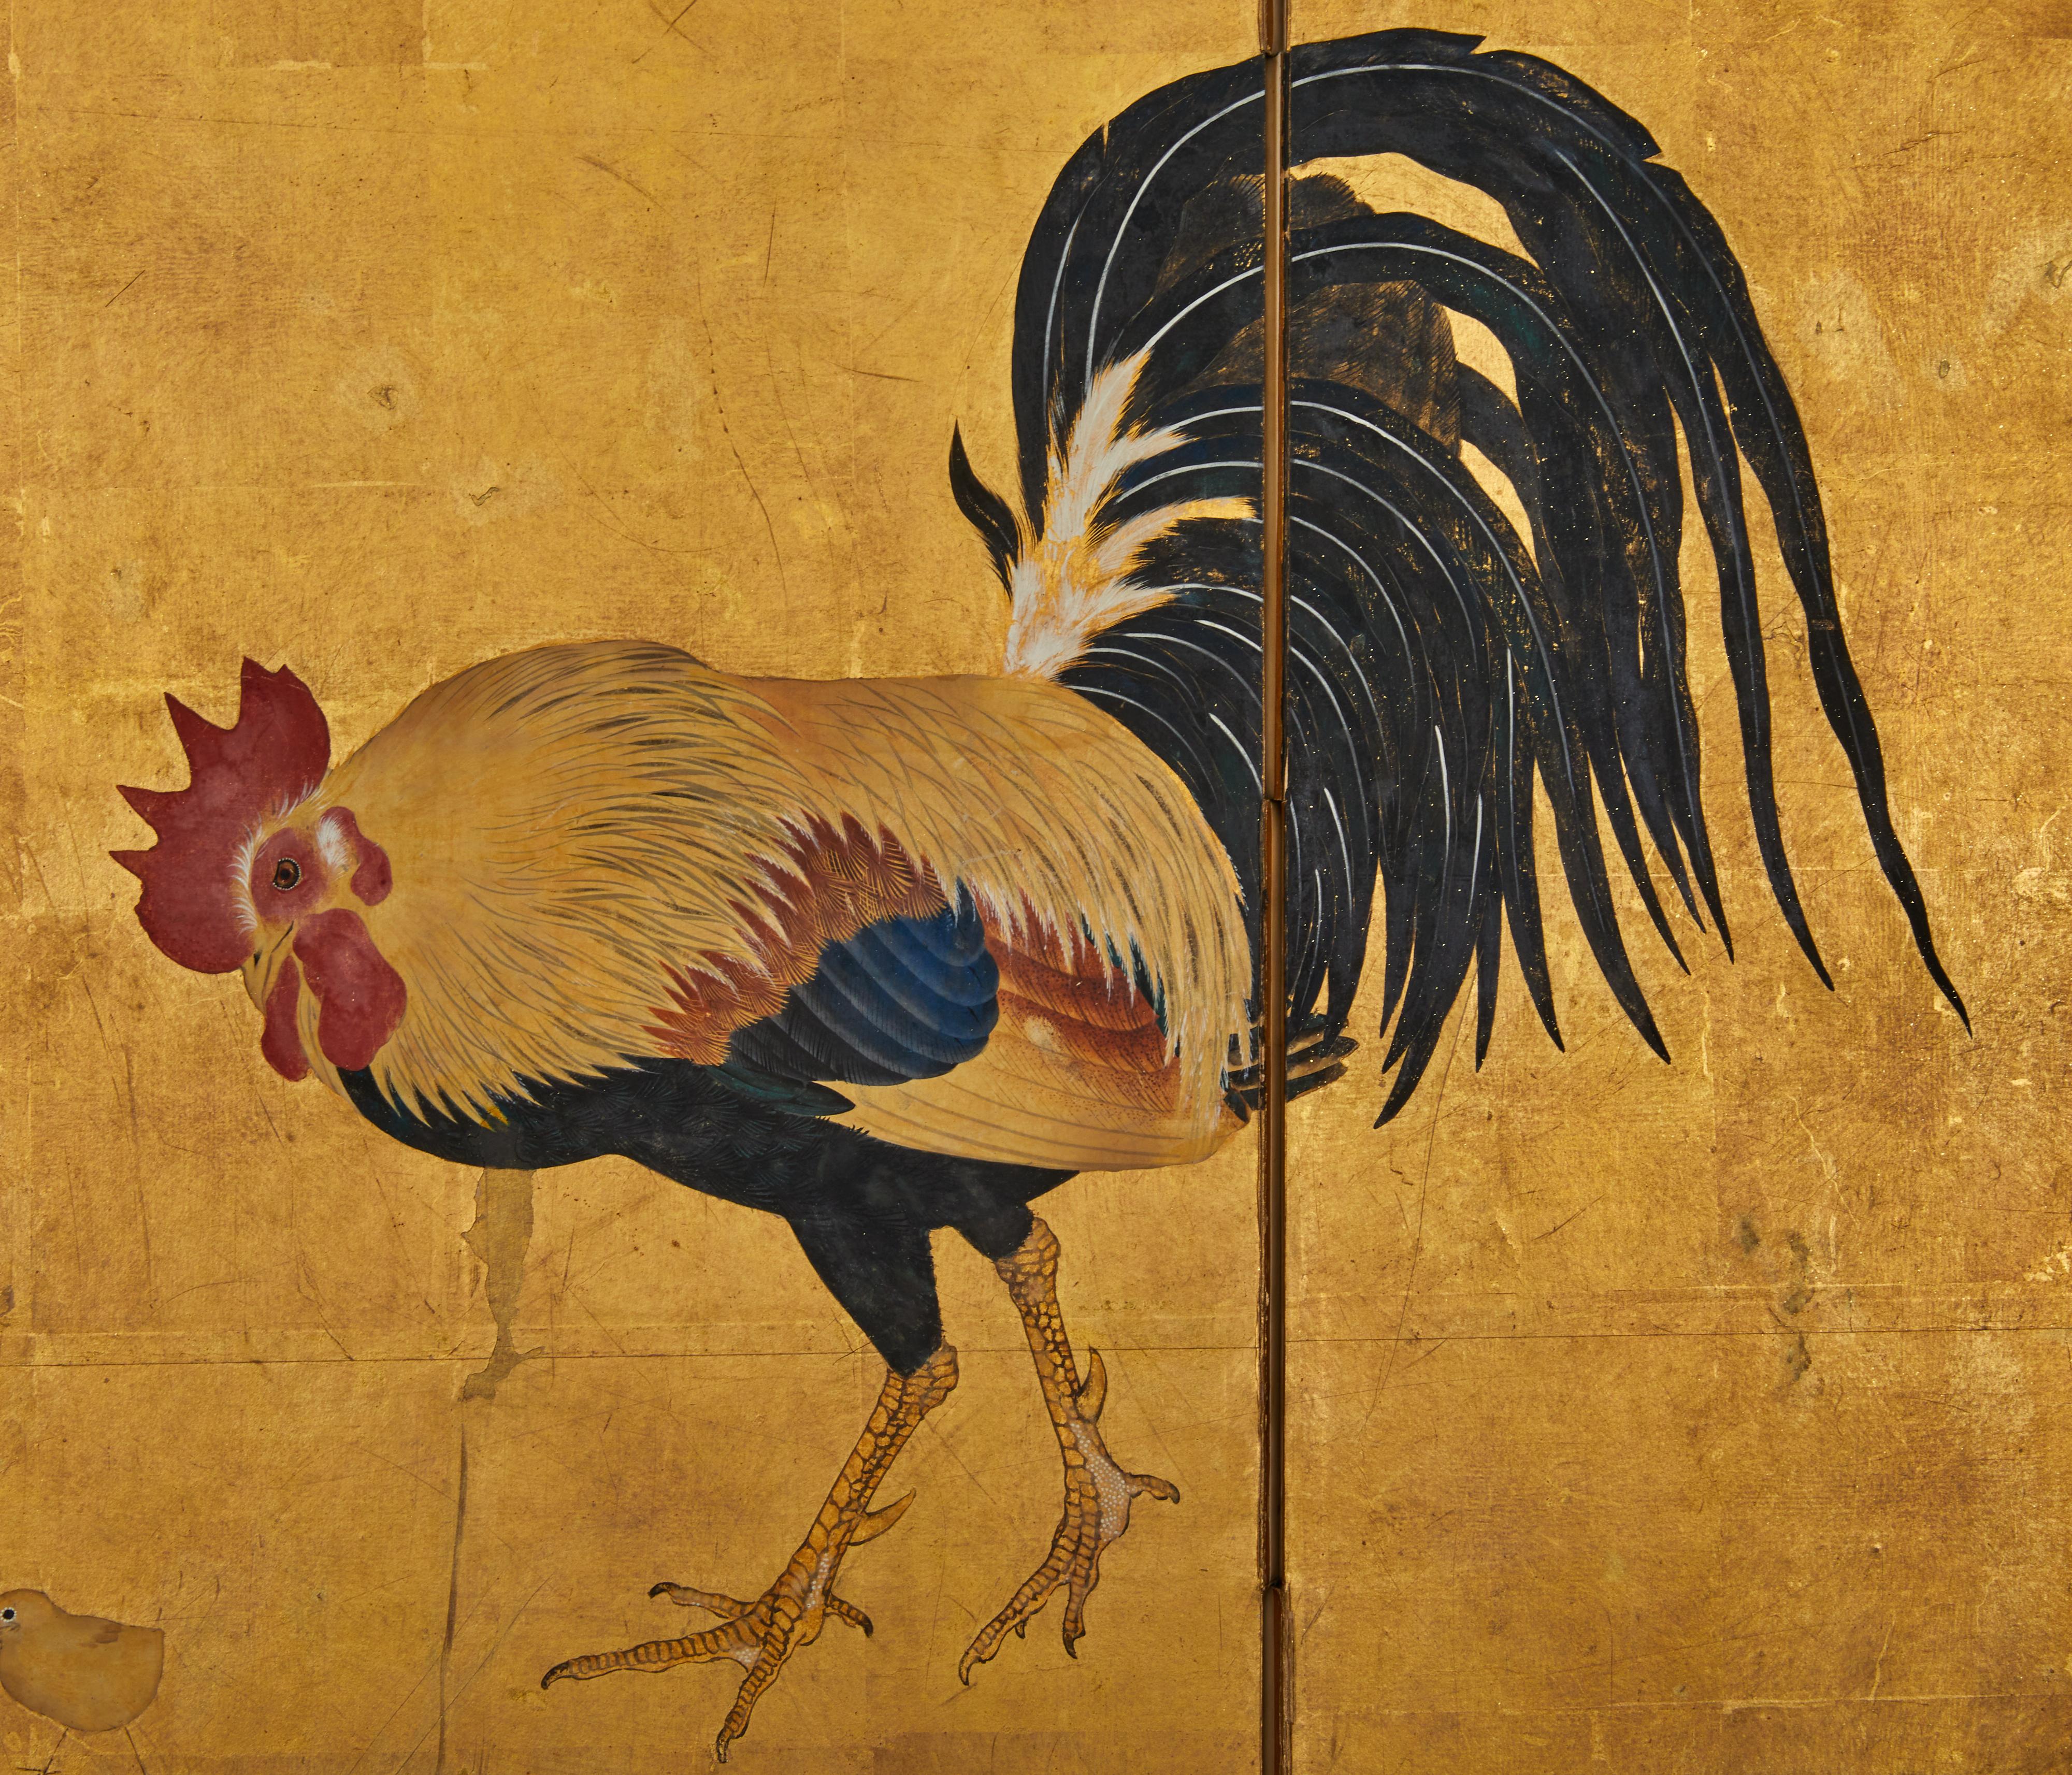 Meiji period painting (1868 - 1912) of rooster, hen, and chicks in mineral pigments and ink on mulberry paper with silk brocade border. Signed Soken.